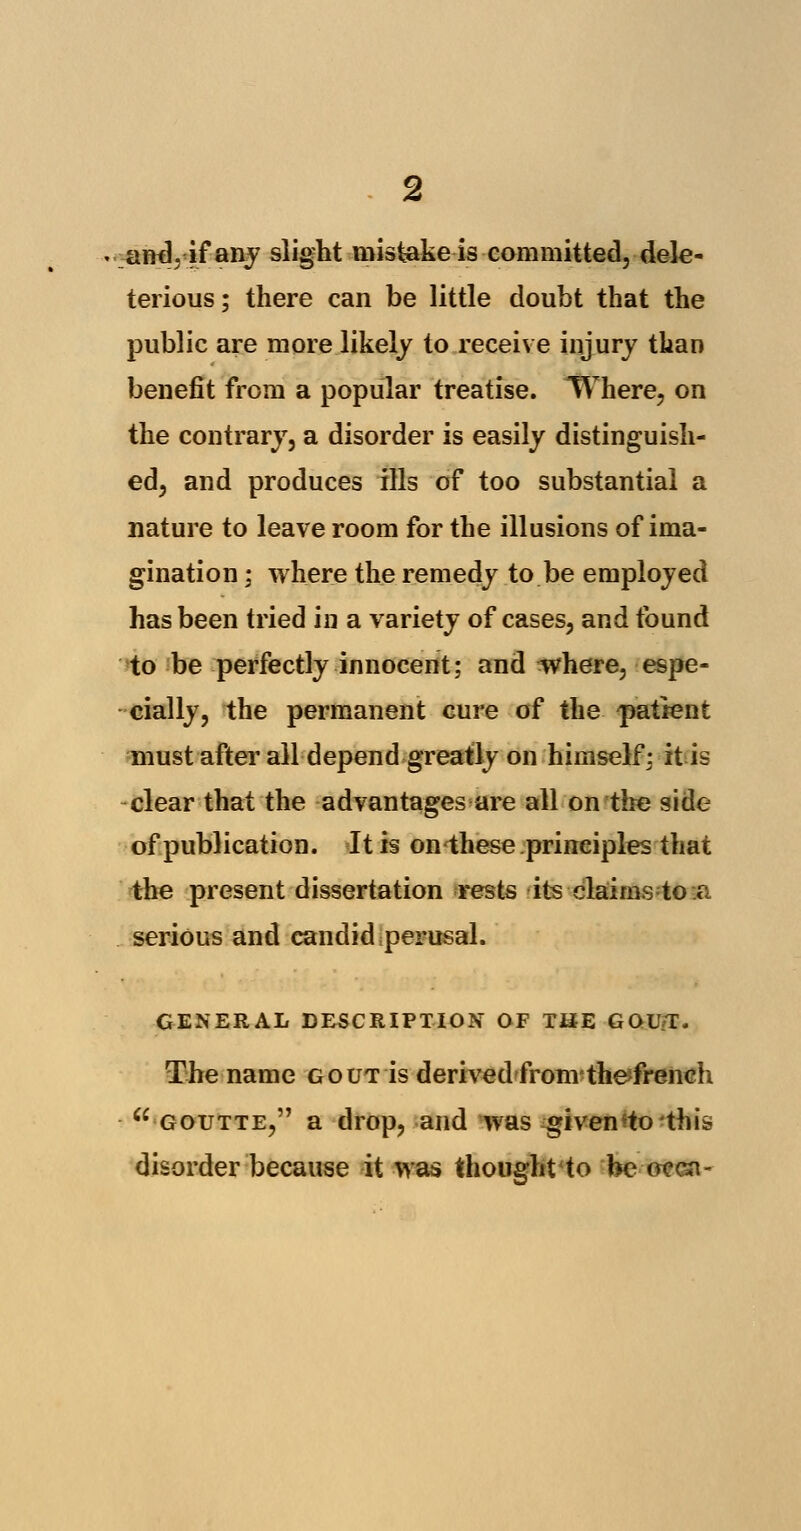 wm\, if any slight mistake is committed, dele- terious; there can be little doubt that the public are more likely to receive injury than benefit from a popular treatise. Where, on the contrary, a disorder is easily distinguish- ed, and produces ills of too substantial a nature to leave room for the illusions of ima- gination ; where the remedy to be employed has been tried in a variety of cases, and found to be perfectly innocent; and where, espe- cially, the permanent cure of the patient must after all depend greatly on himself; it is clear that the advantages are all on the side of publication. It is on these principles that the present dissertation rests its claims to a serious and candid perusal. GENERAL DESCRIPTION OF THE GOU/T. The name gout is derivedfrom thefrencli  GOUTTE, a drop, and was given to this disorder because it was thought to be oeen-